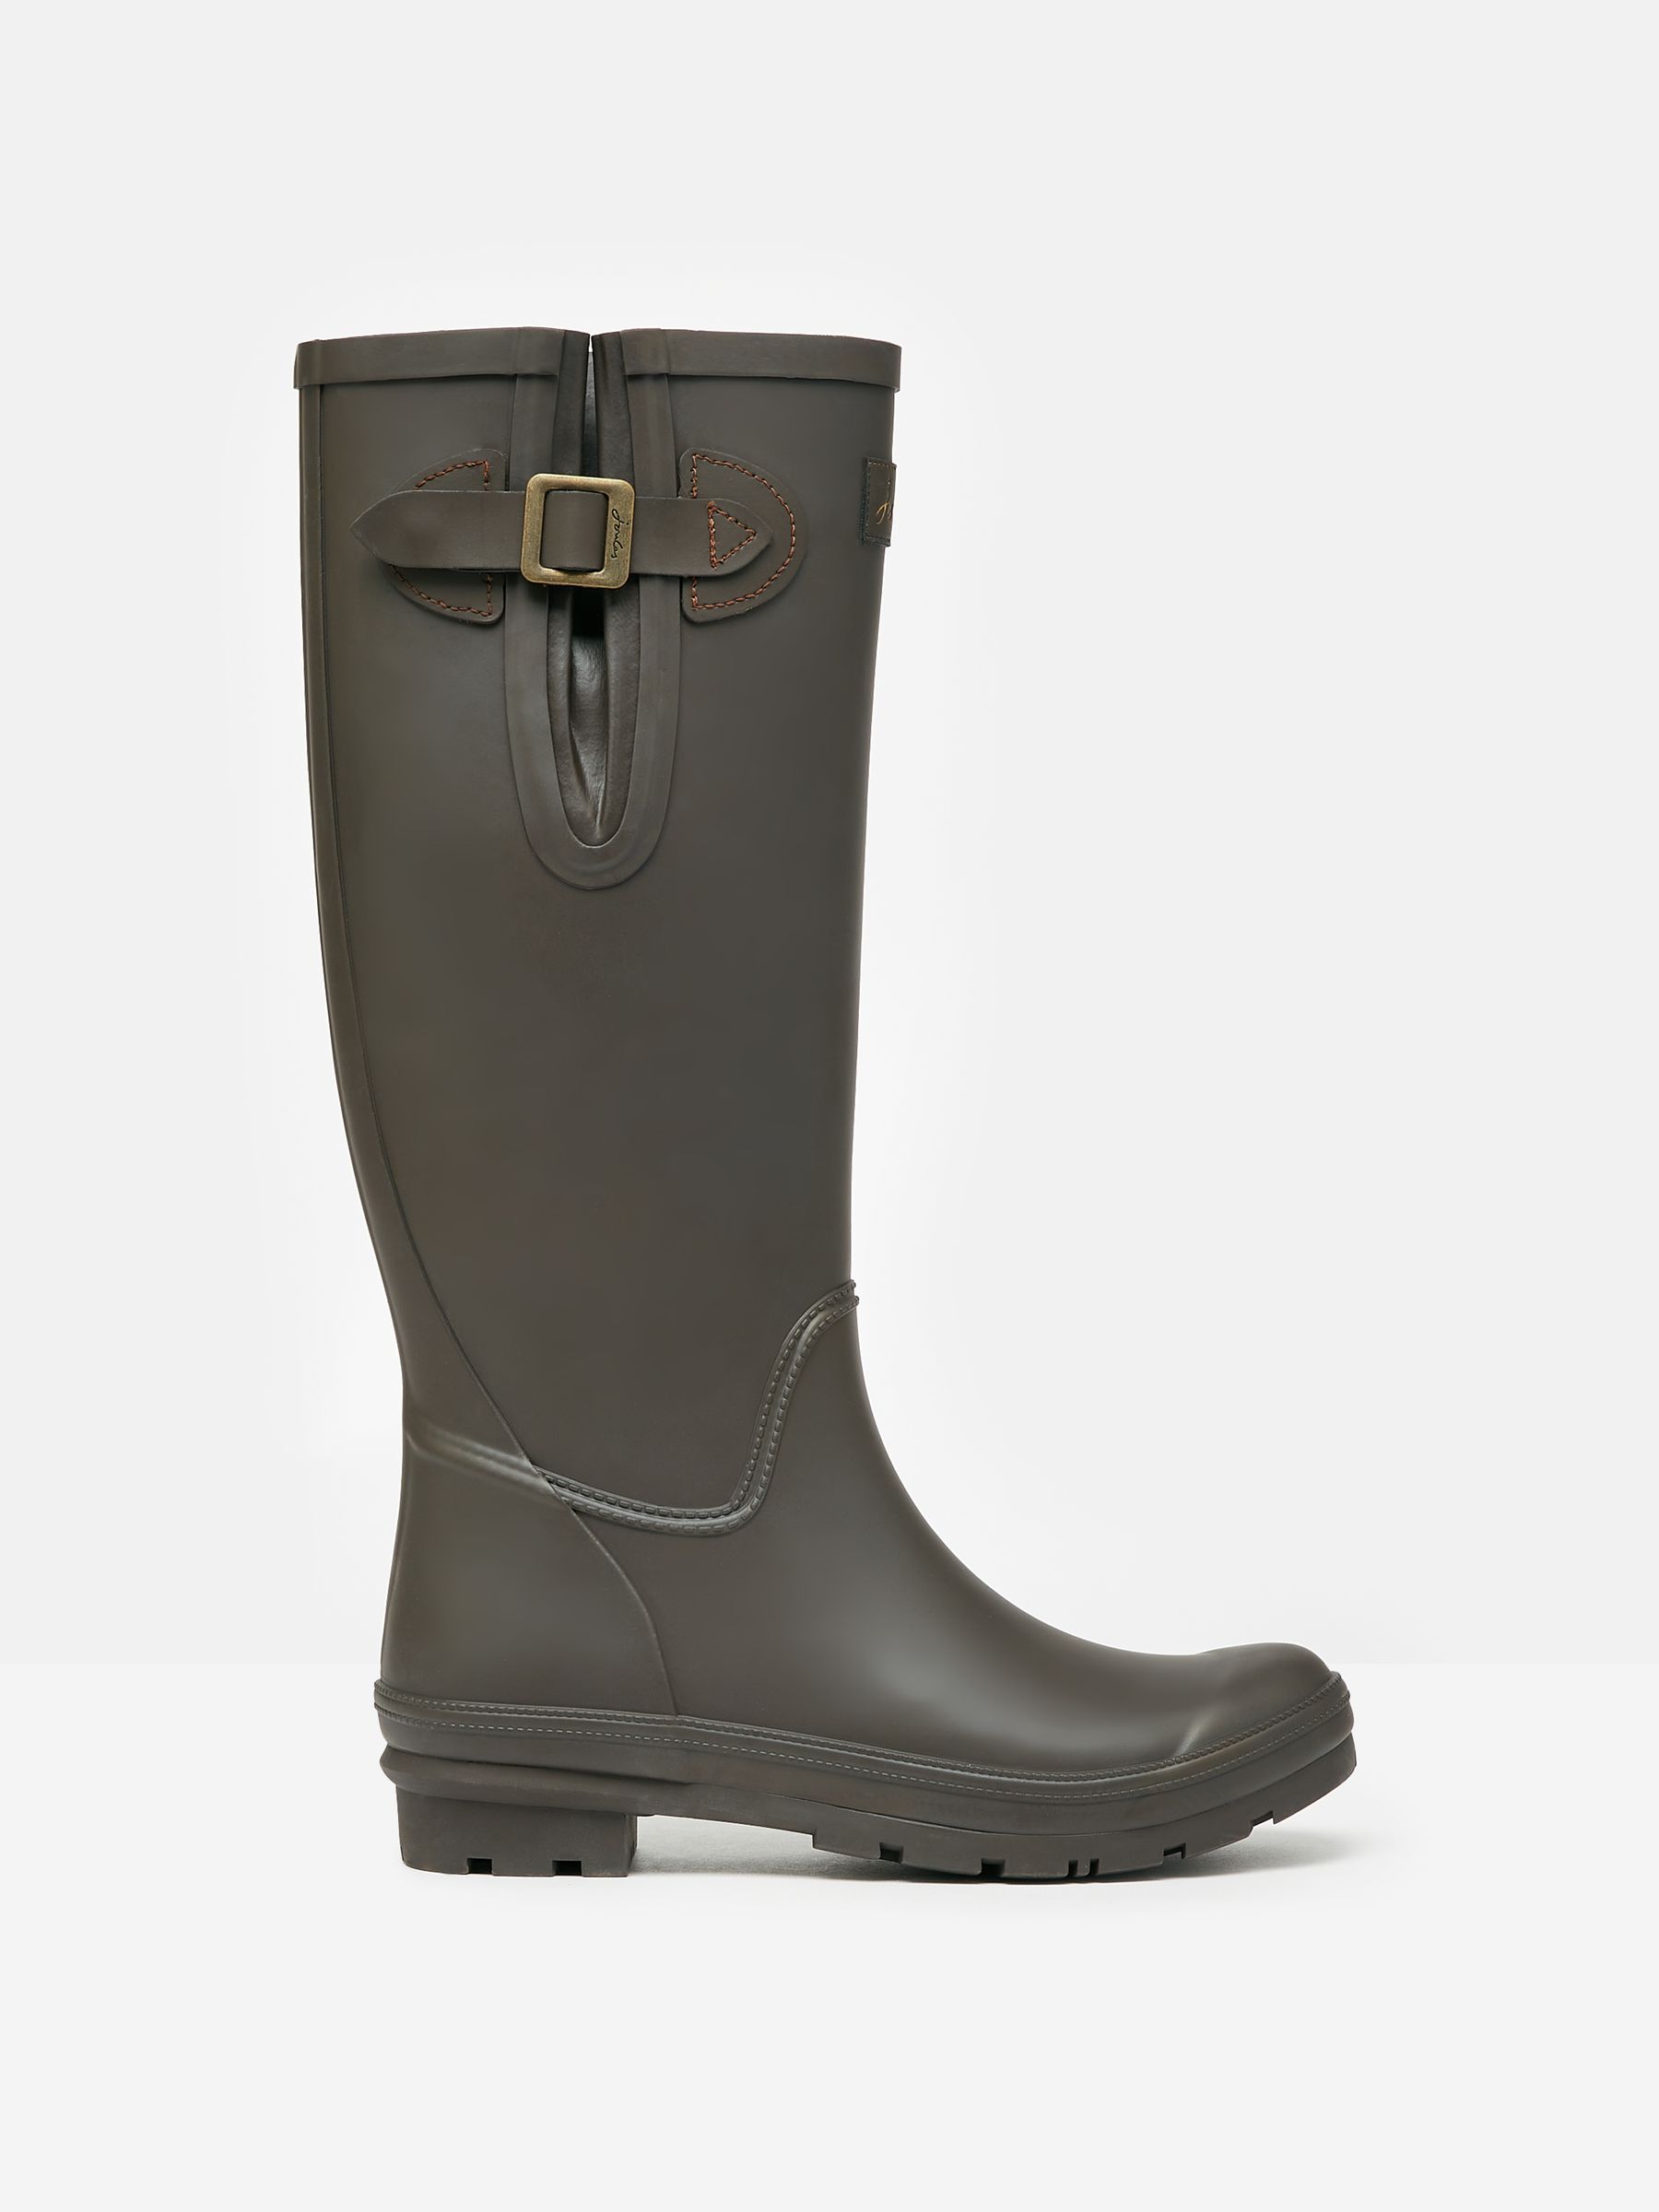 Buy Houghton Chocolate Brown Adjustable Tall Wellies from the Joules ...